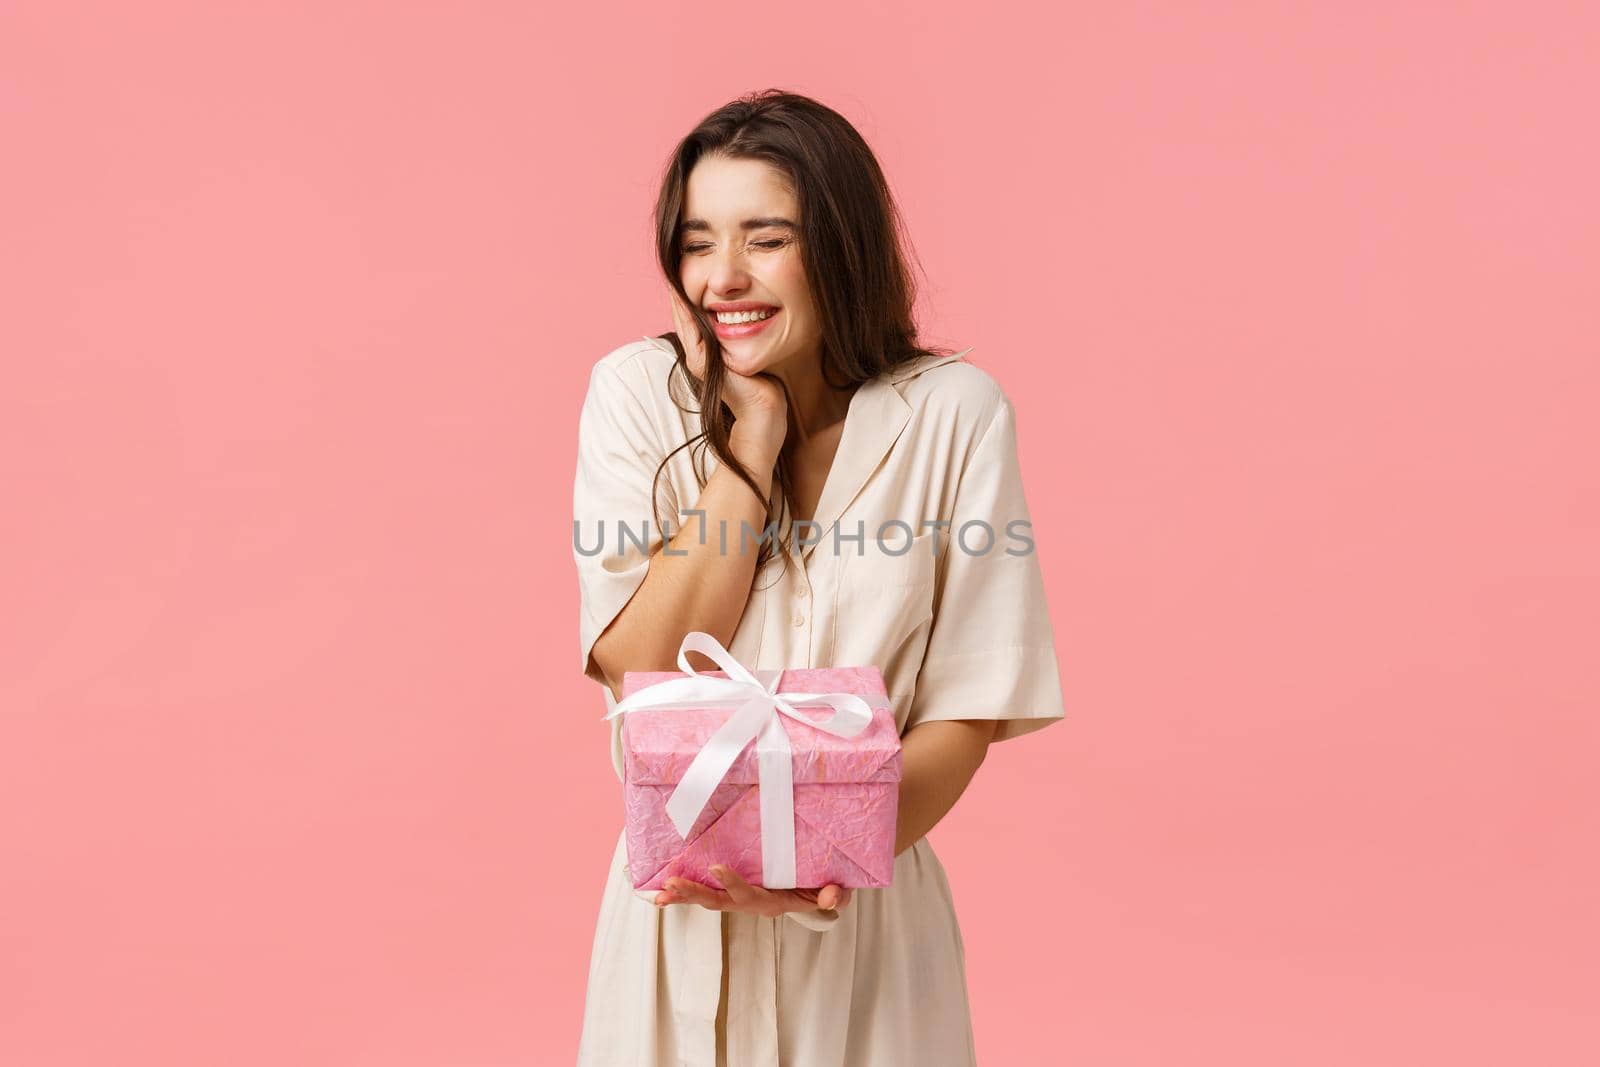 Anticipation, celebration and party concept. Cheerful lovely young woman in dress, cheering close eyes happily smiling and laughing, receiving nice present, got pretty gift, pink background.